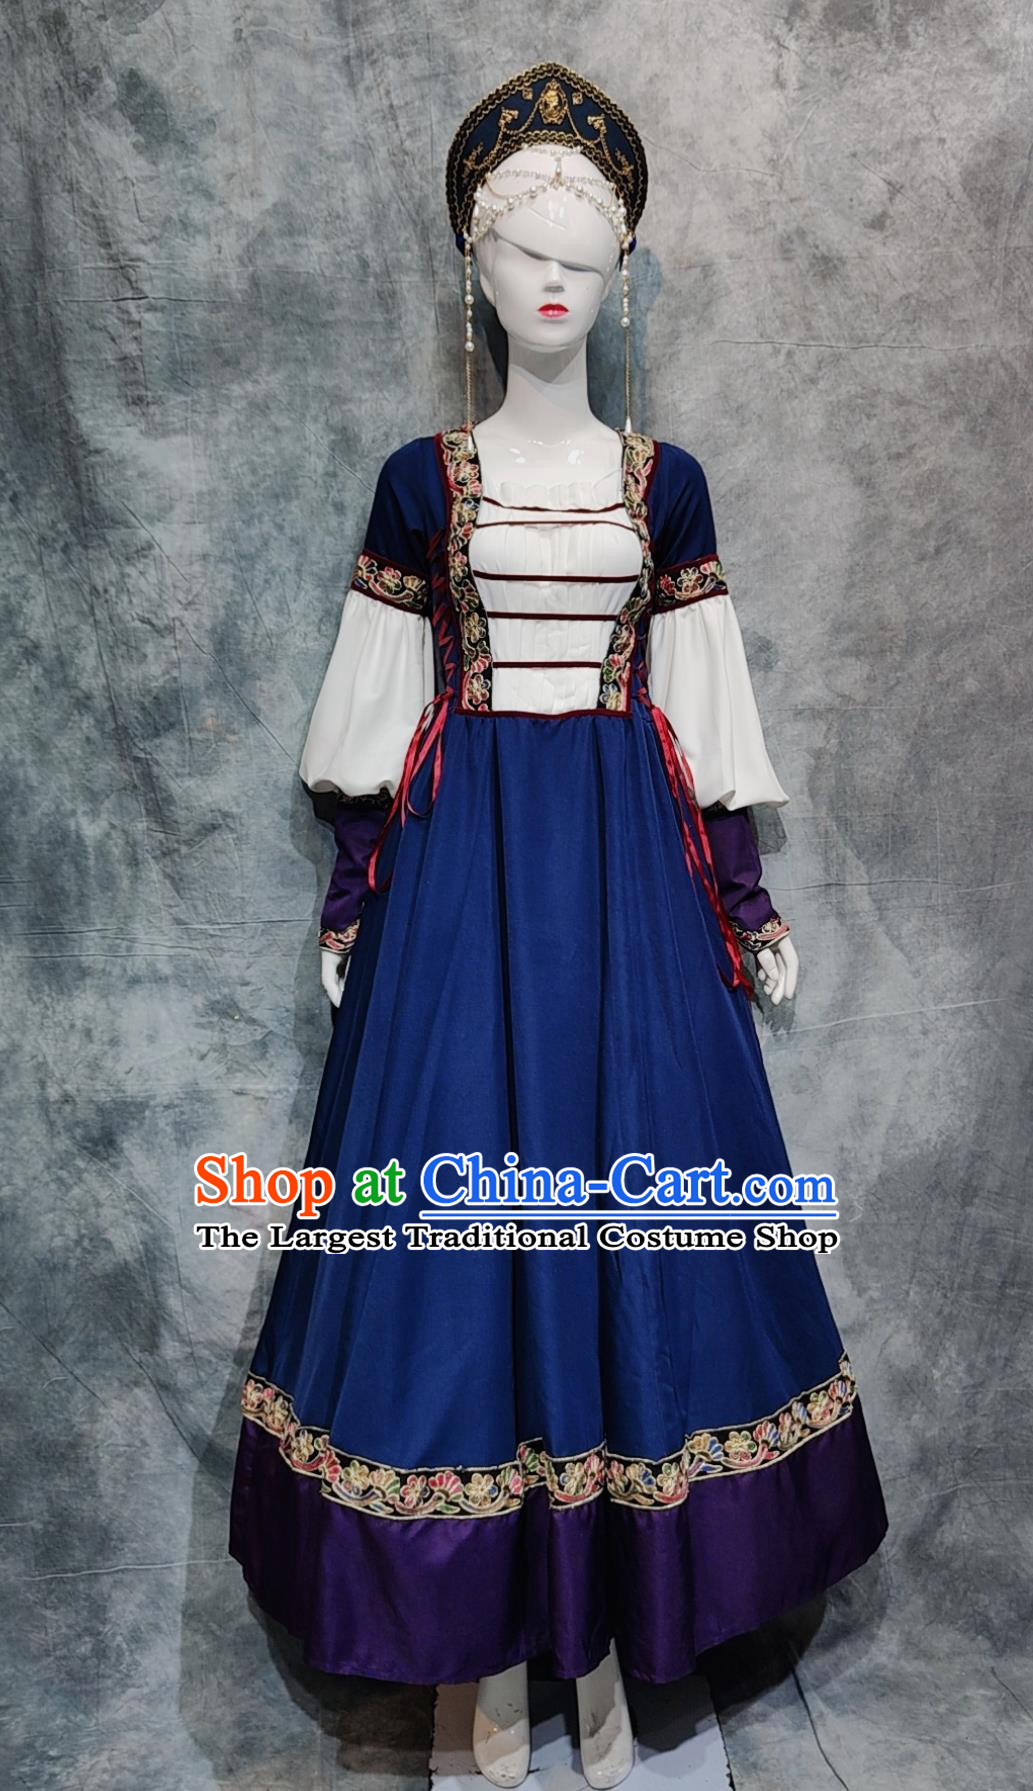 China Traditional Dance Costume Chinese Russian Ethnic Woman Festival Clothing Xinjiang National Minority Stage Performance Blue Dress